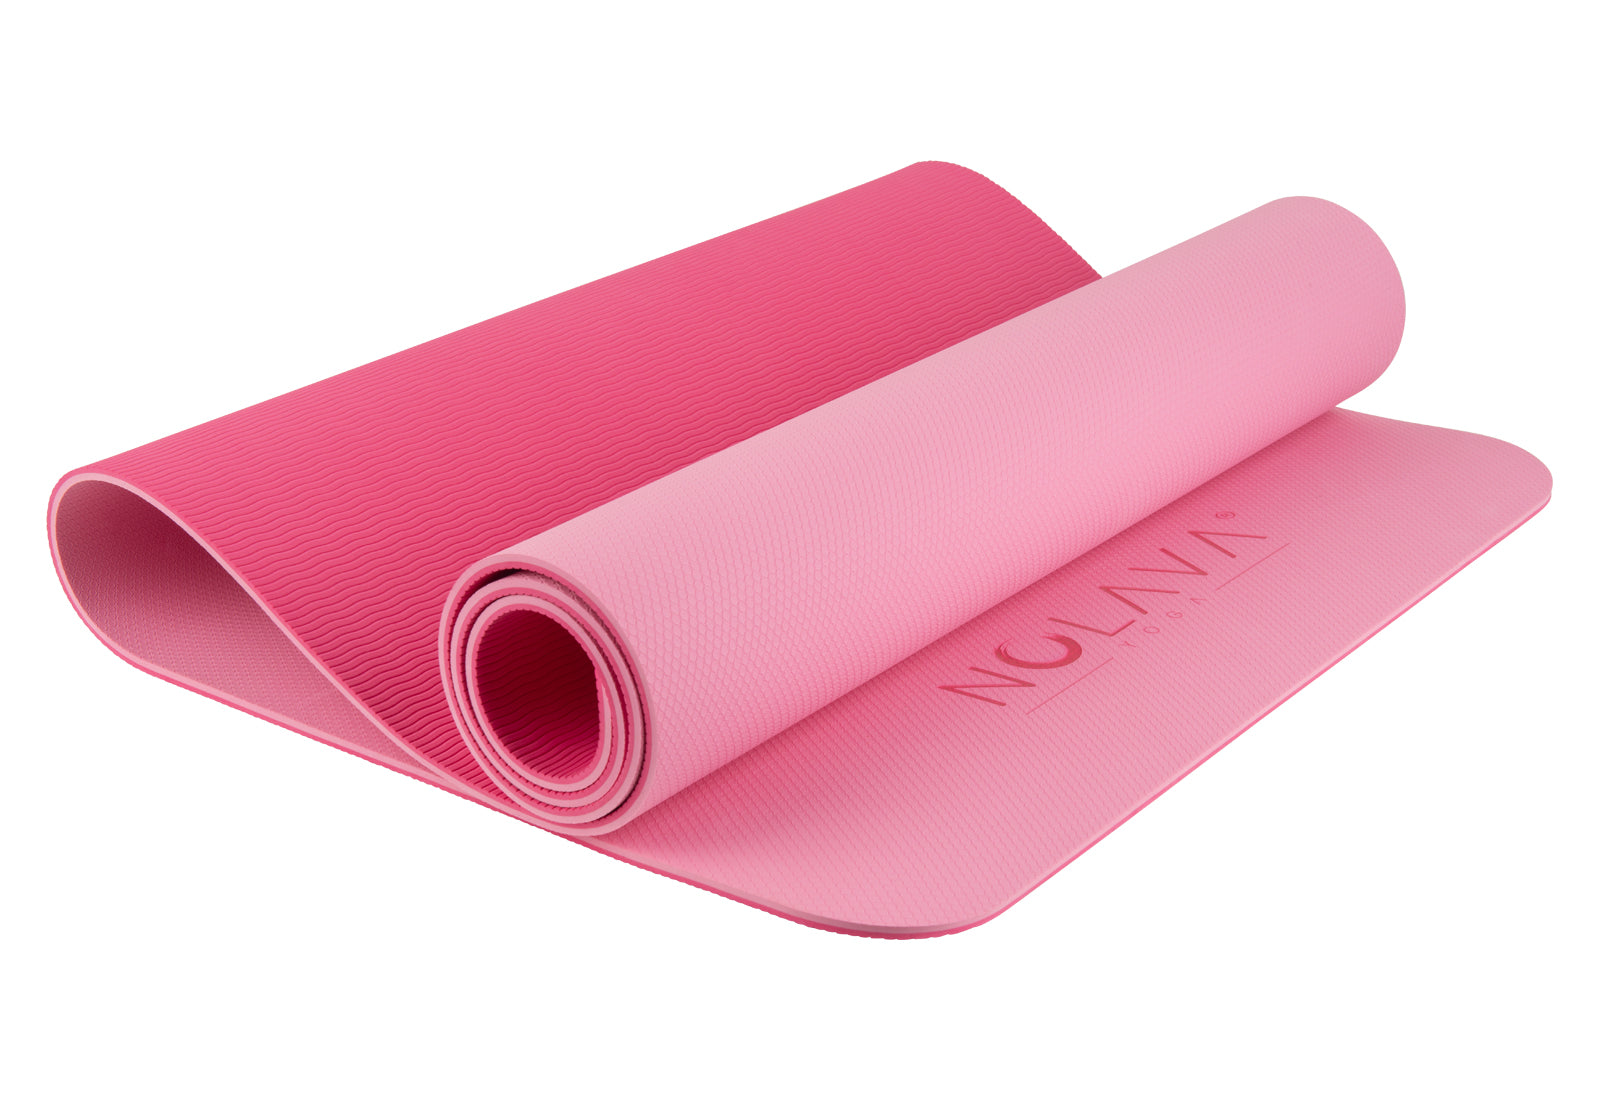 Generic Pink Yoga Fitness Exercise Mat